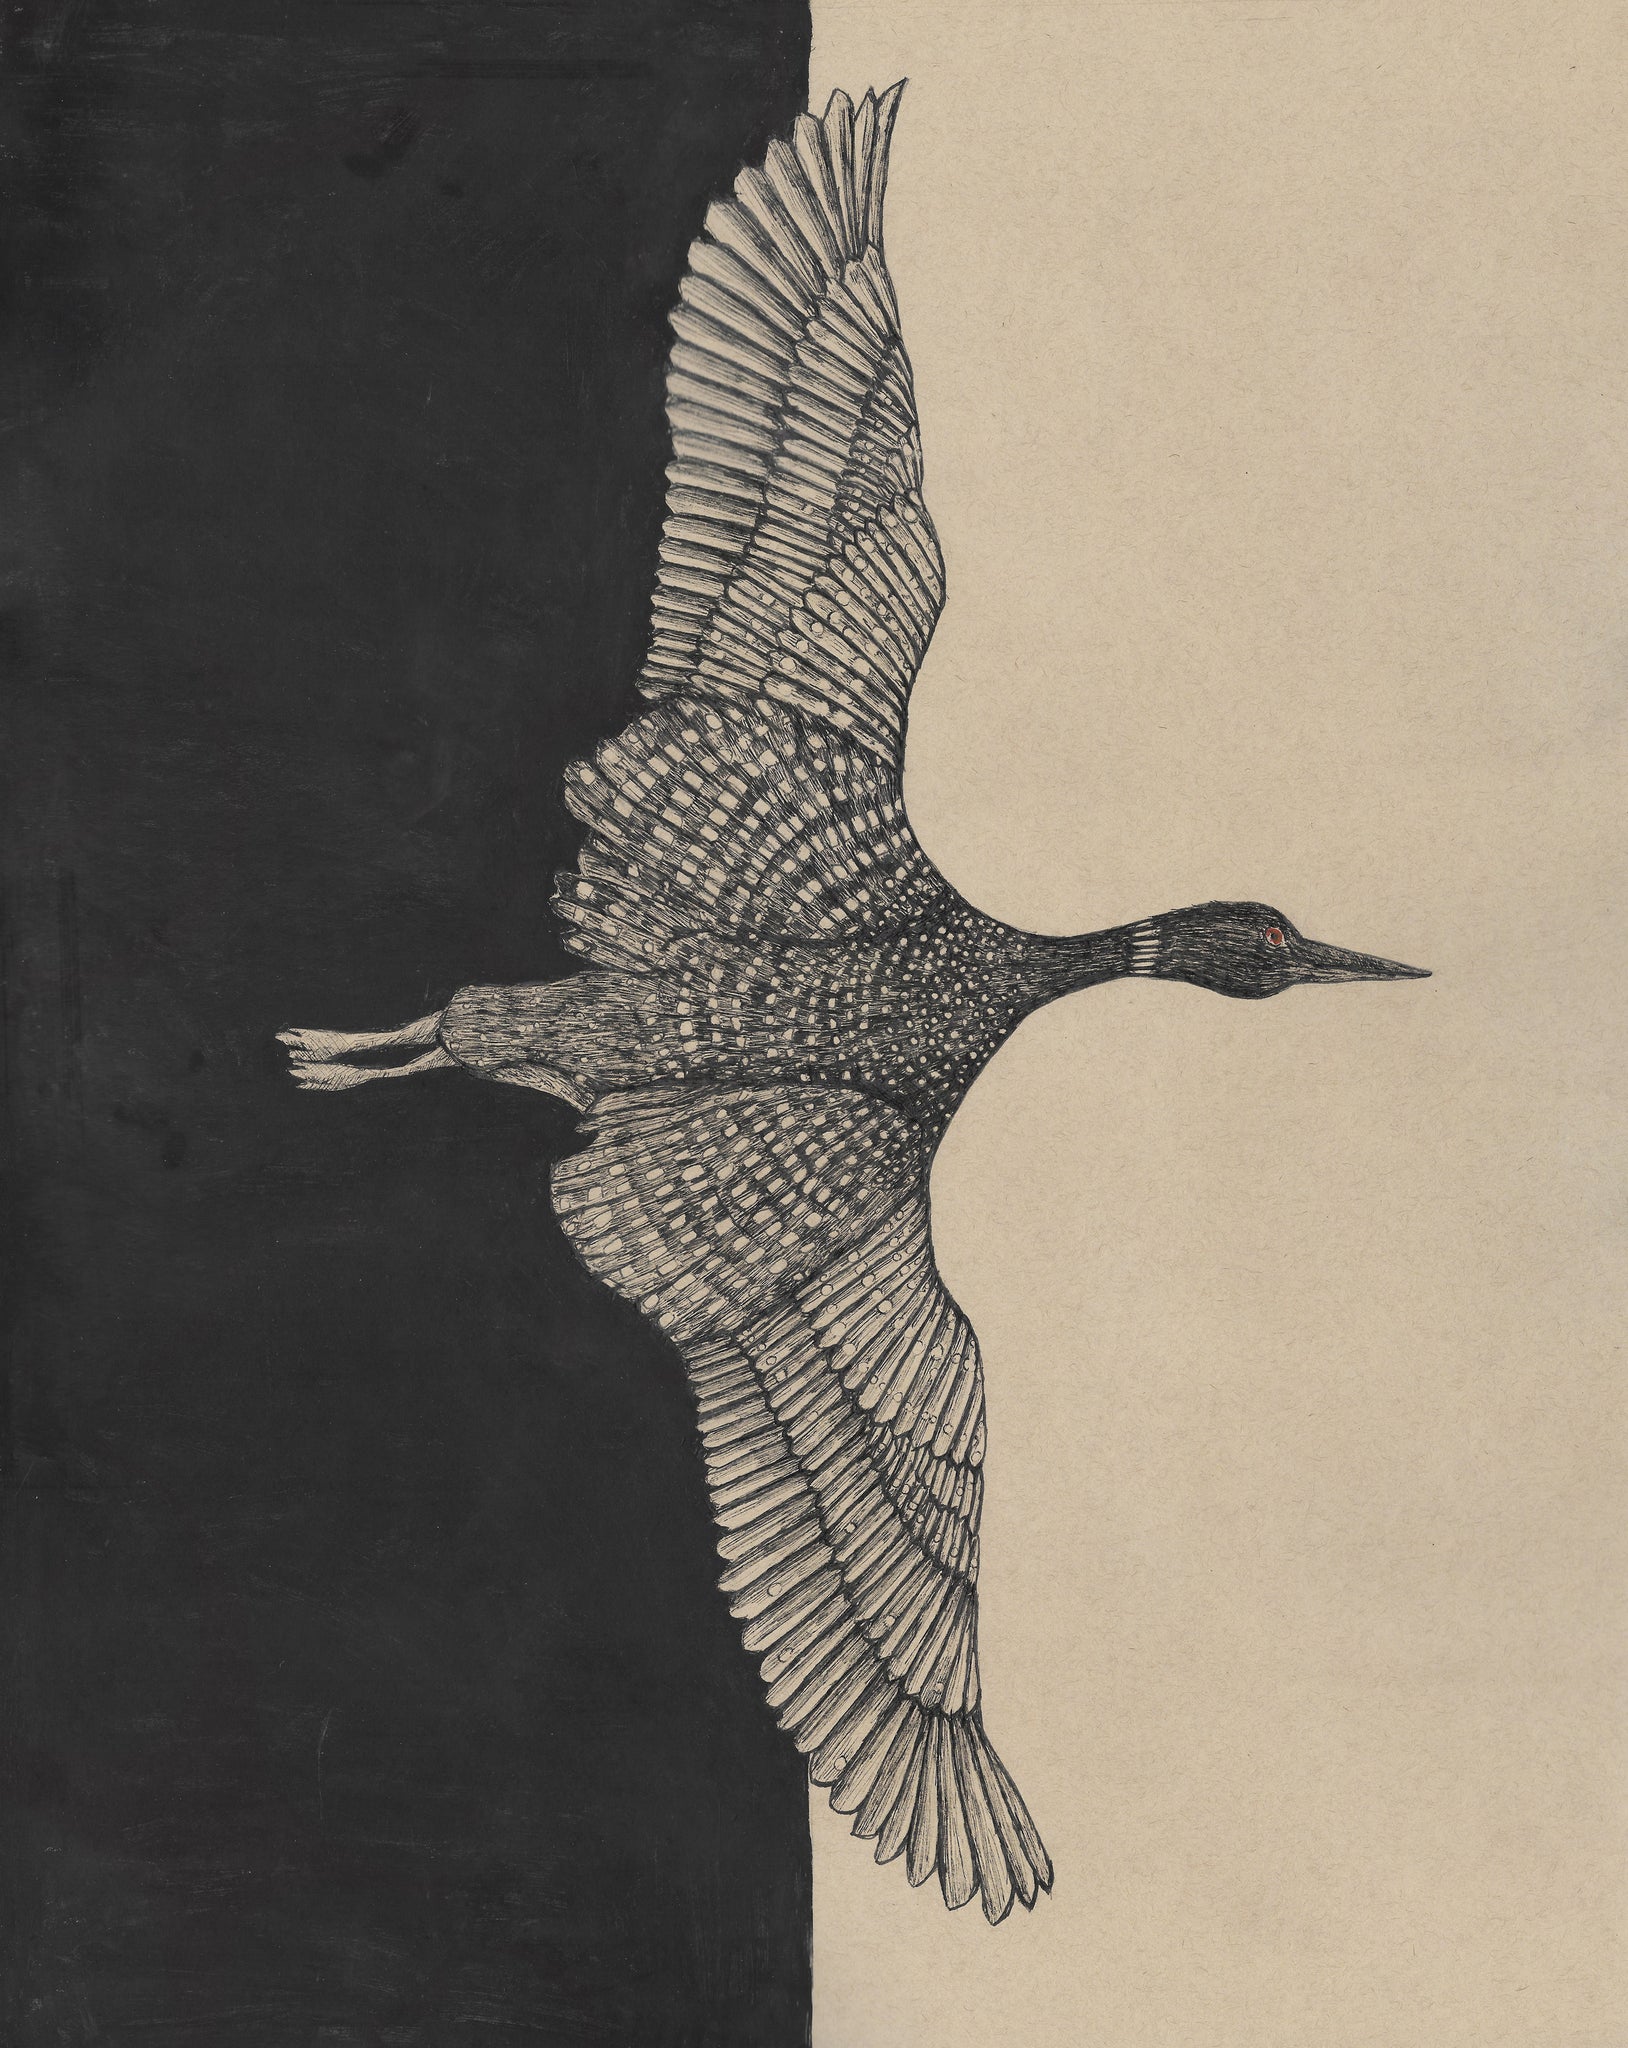 The Loon by Hilary Dufour